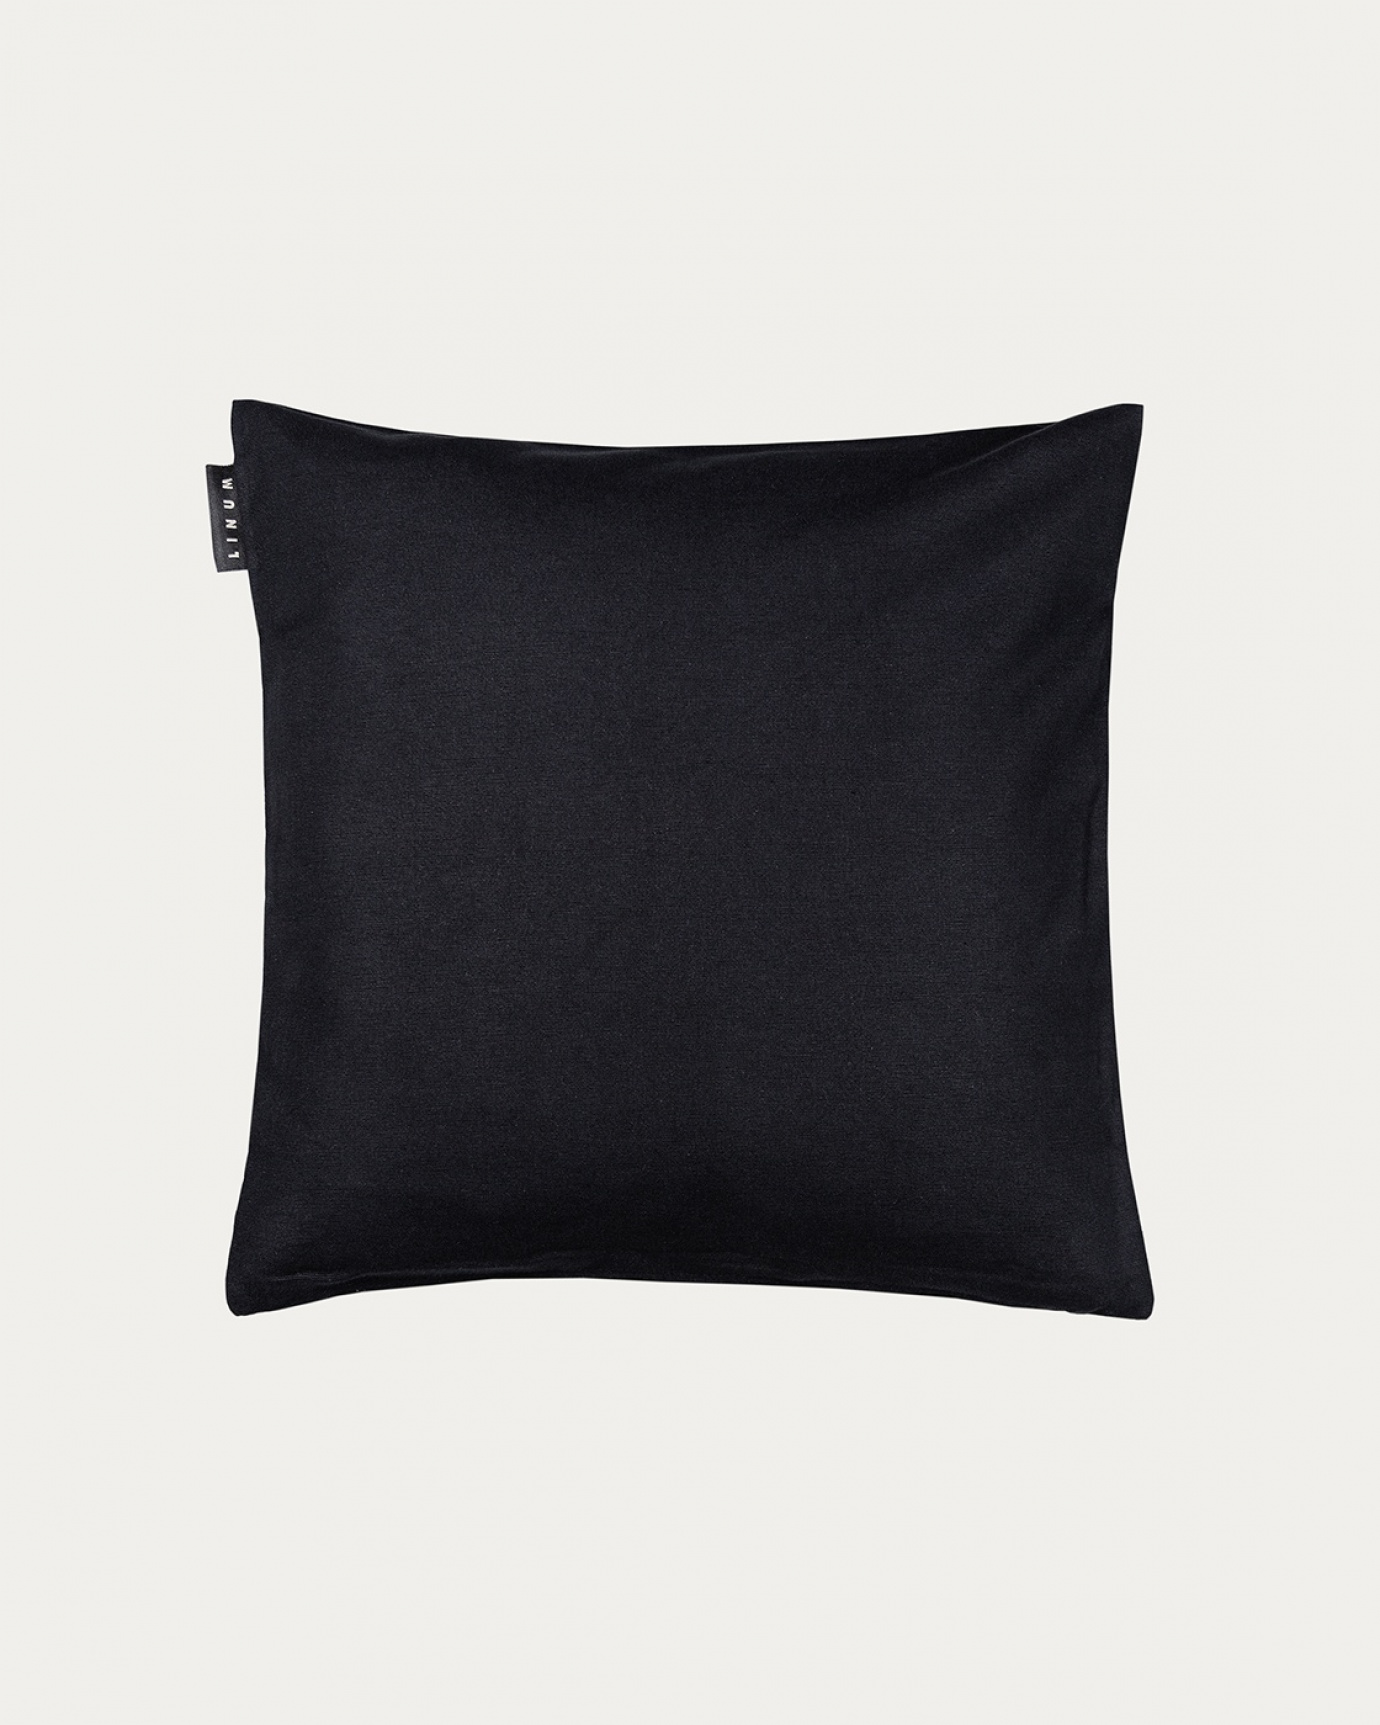 Product image black ANNABELL cushion cover made of soft cotton from LINUM DESIGN. Size 40x40 cm.